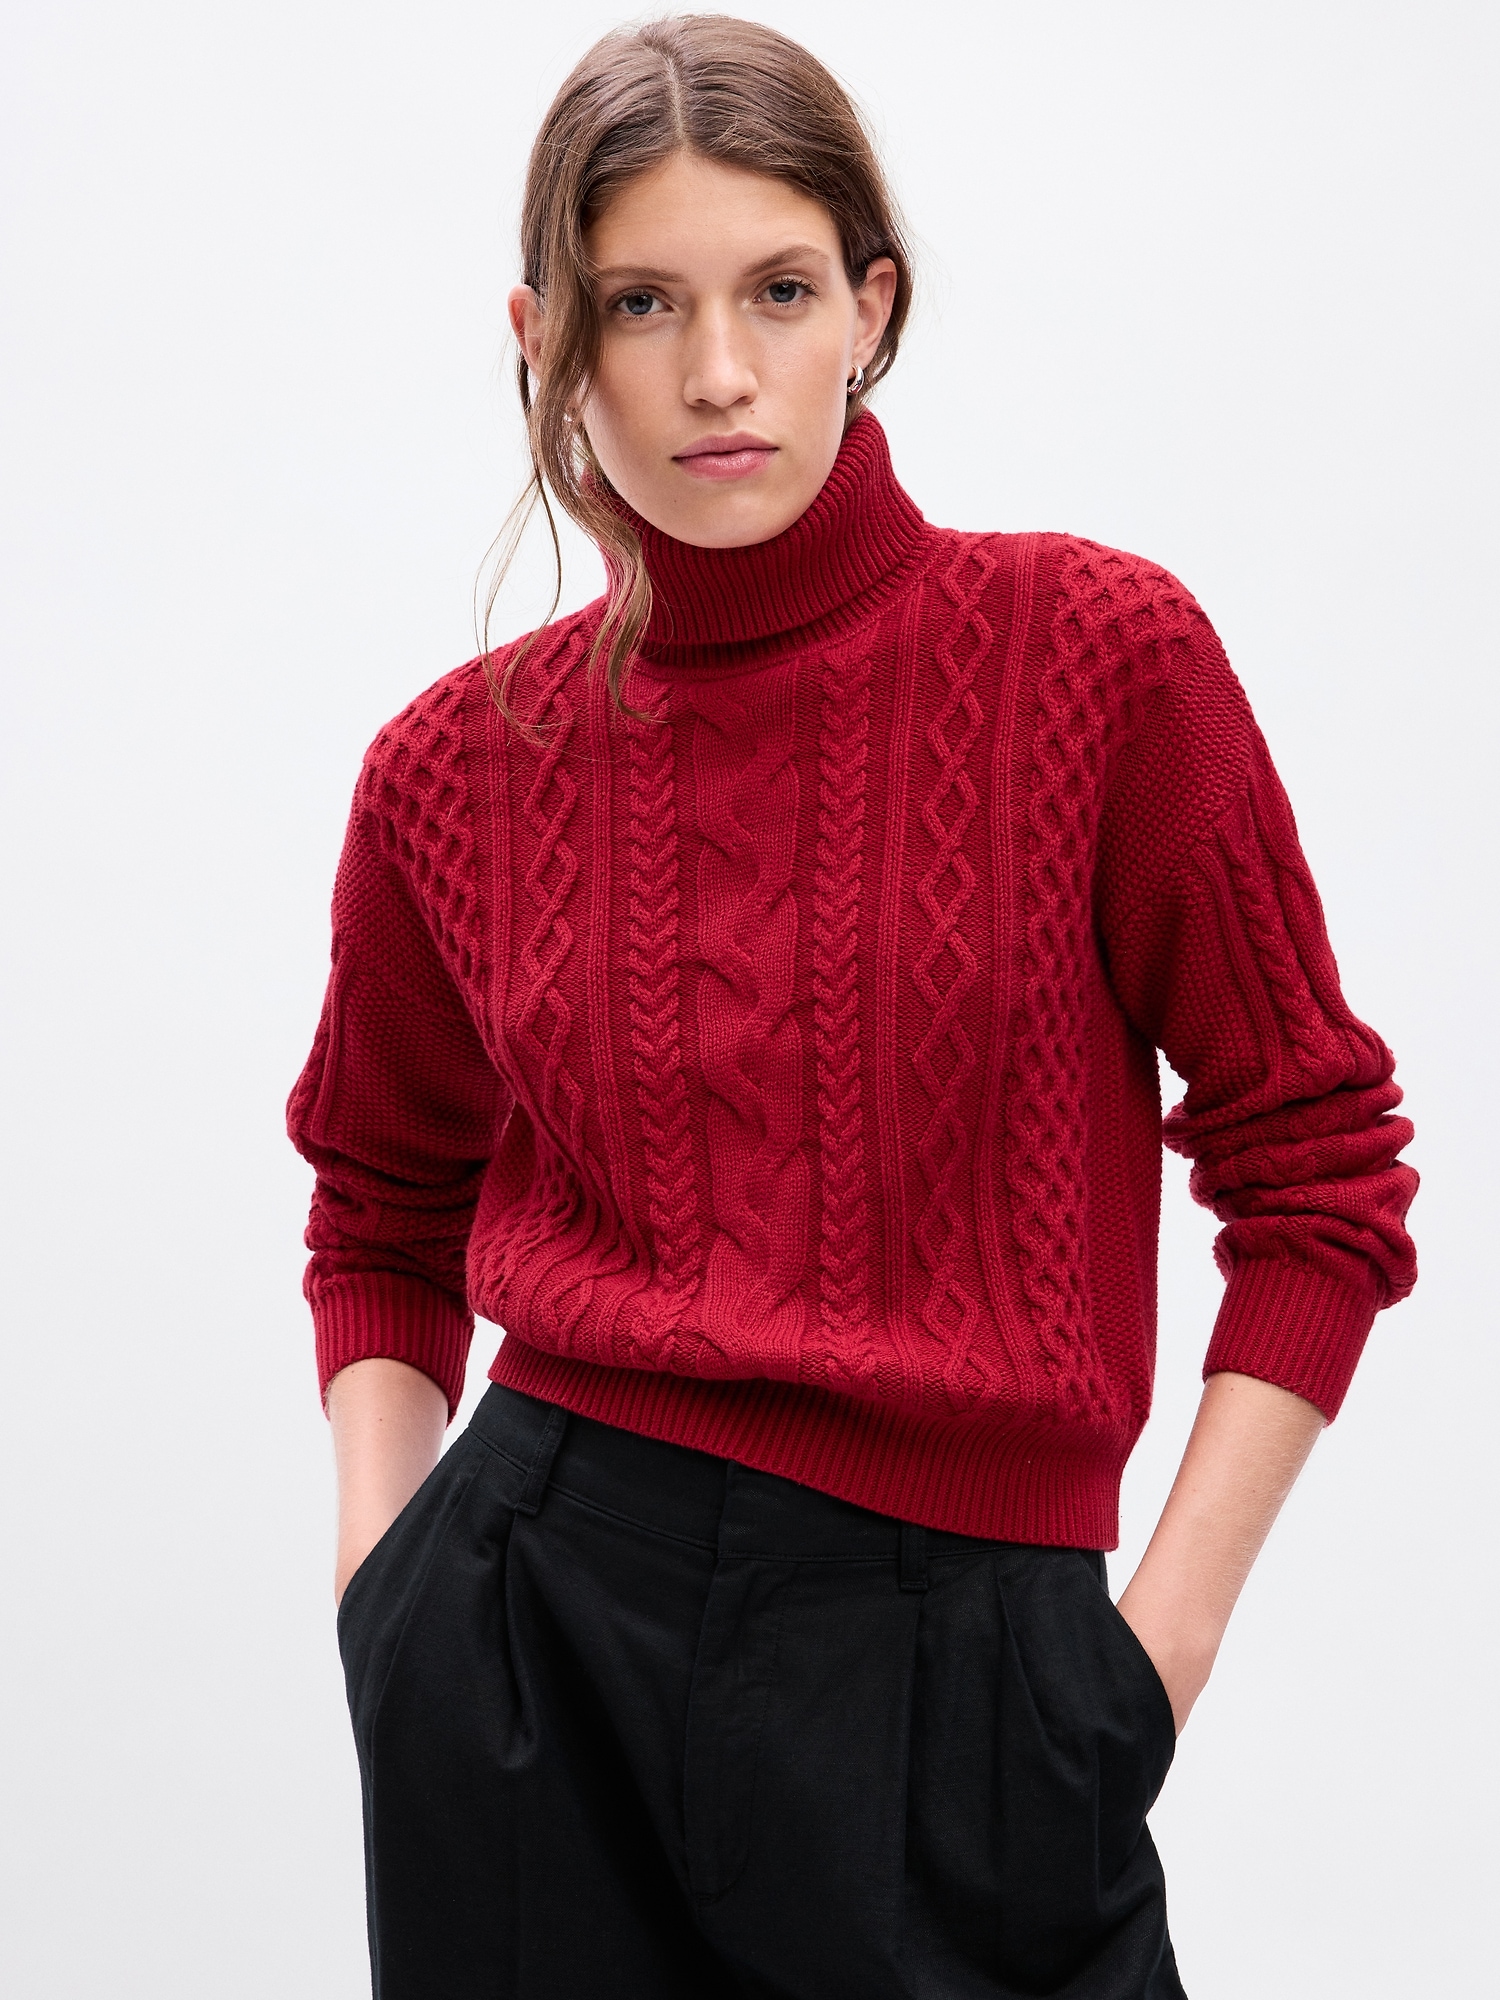 Turtleneck Cable-Knit Cropped Sweater | Gap